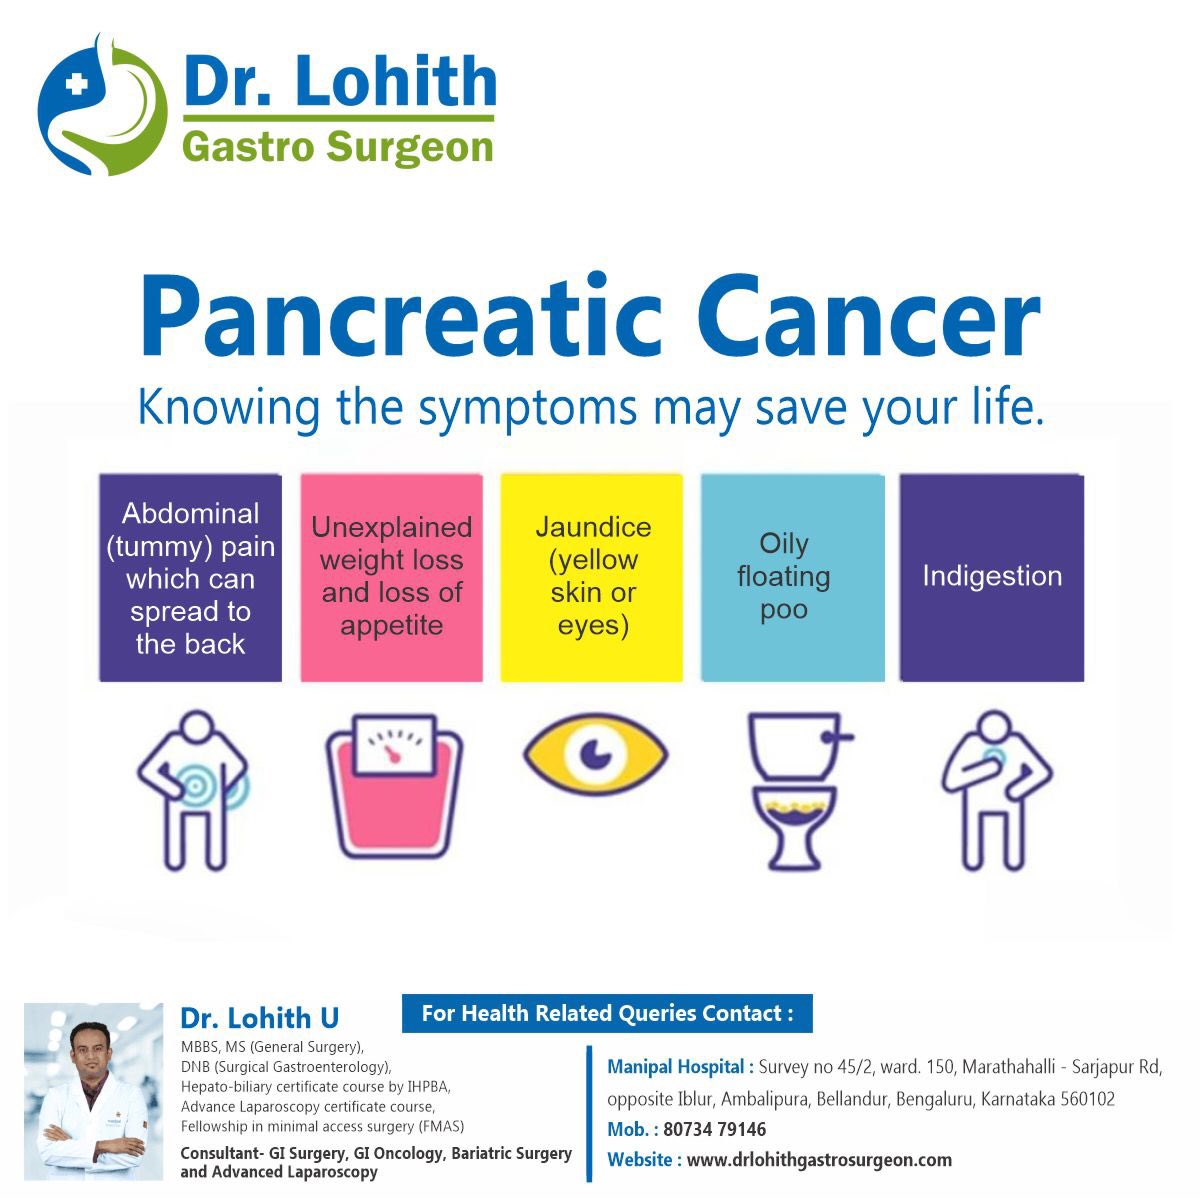 Pancreatic cancer knowing the symptoms may save your life.

Consult Dr. Lohith gastro surgeon in Bangalore for the best pancreatic cancer treatment 

#pancreaticcancer #pancreaticsurgery #pancreaticcancersurvivor #pancreaticcancerresearch #pancreaticcancer